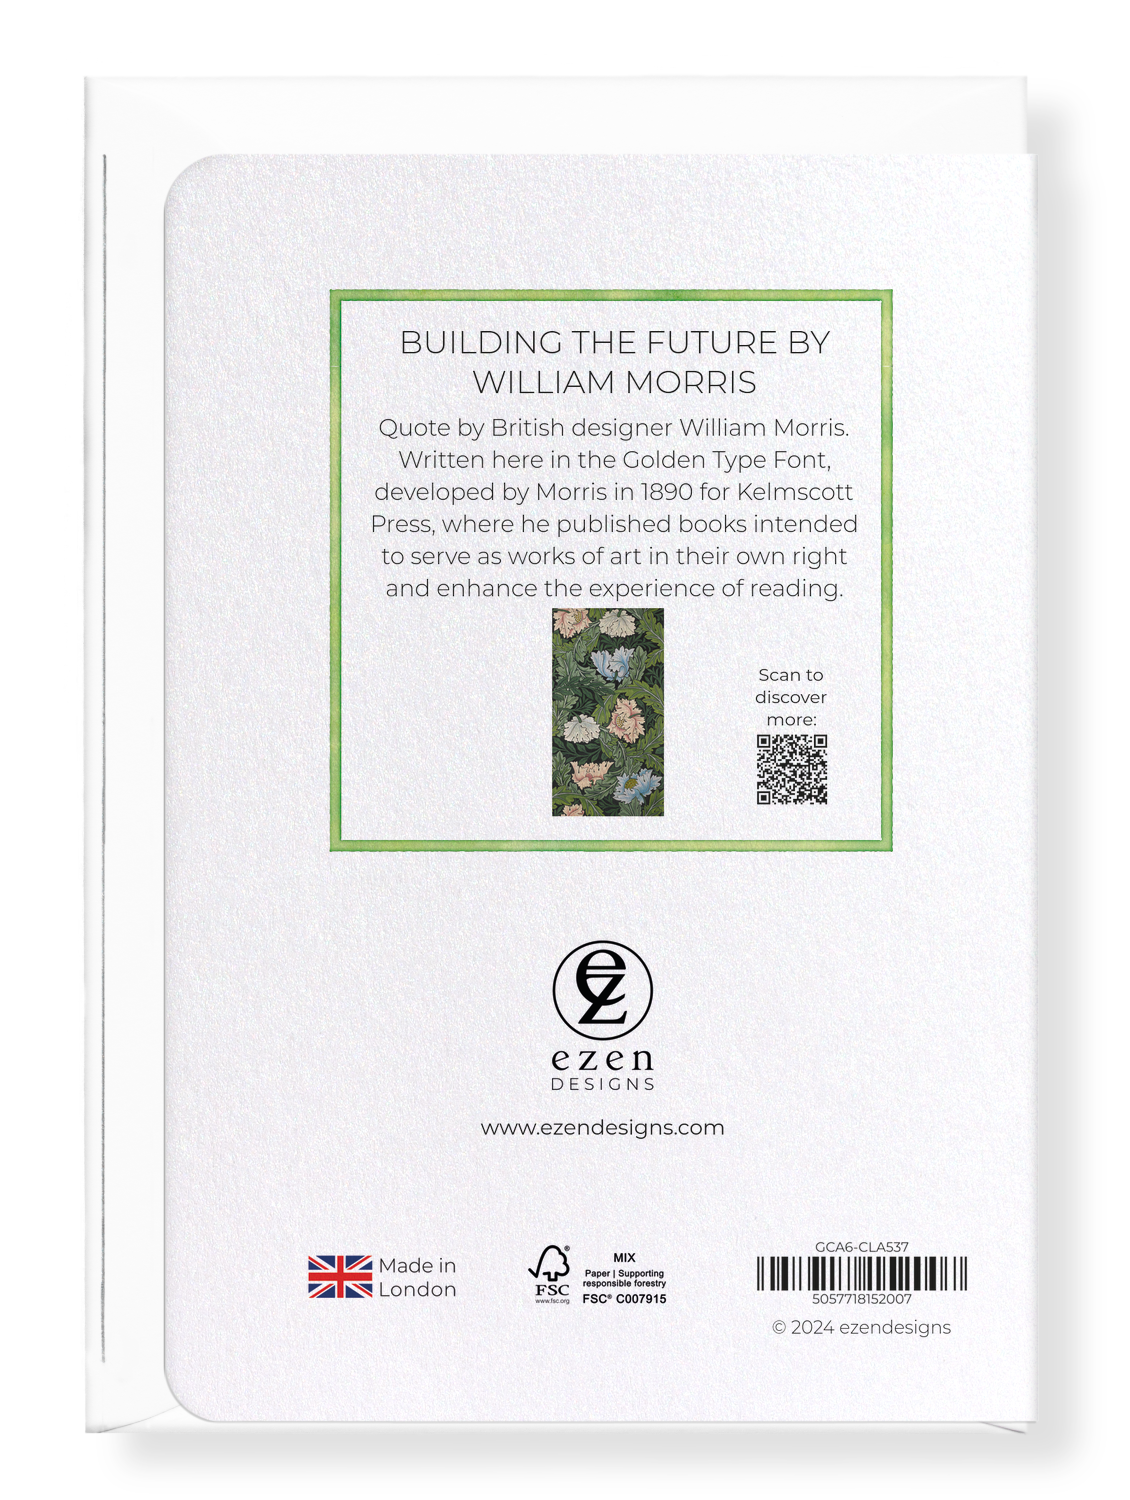 Ezen Designs - Building the Future by William Morris - Greeting Card - Back